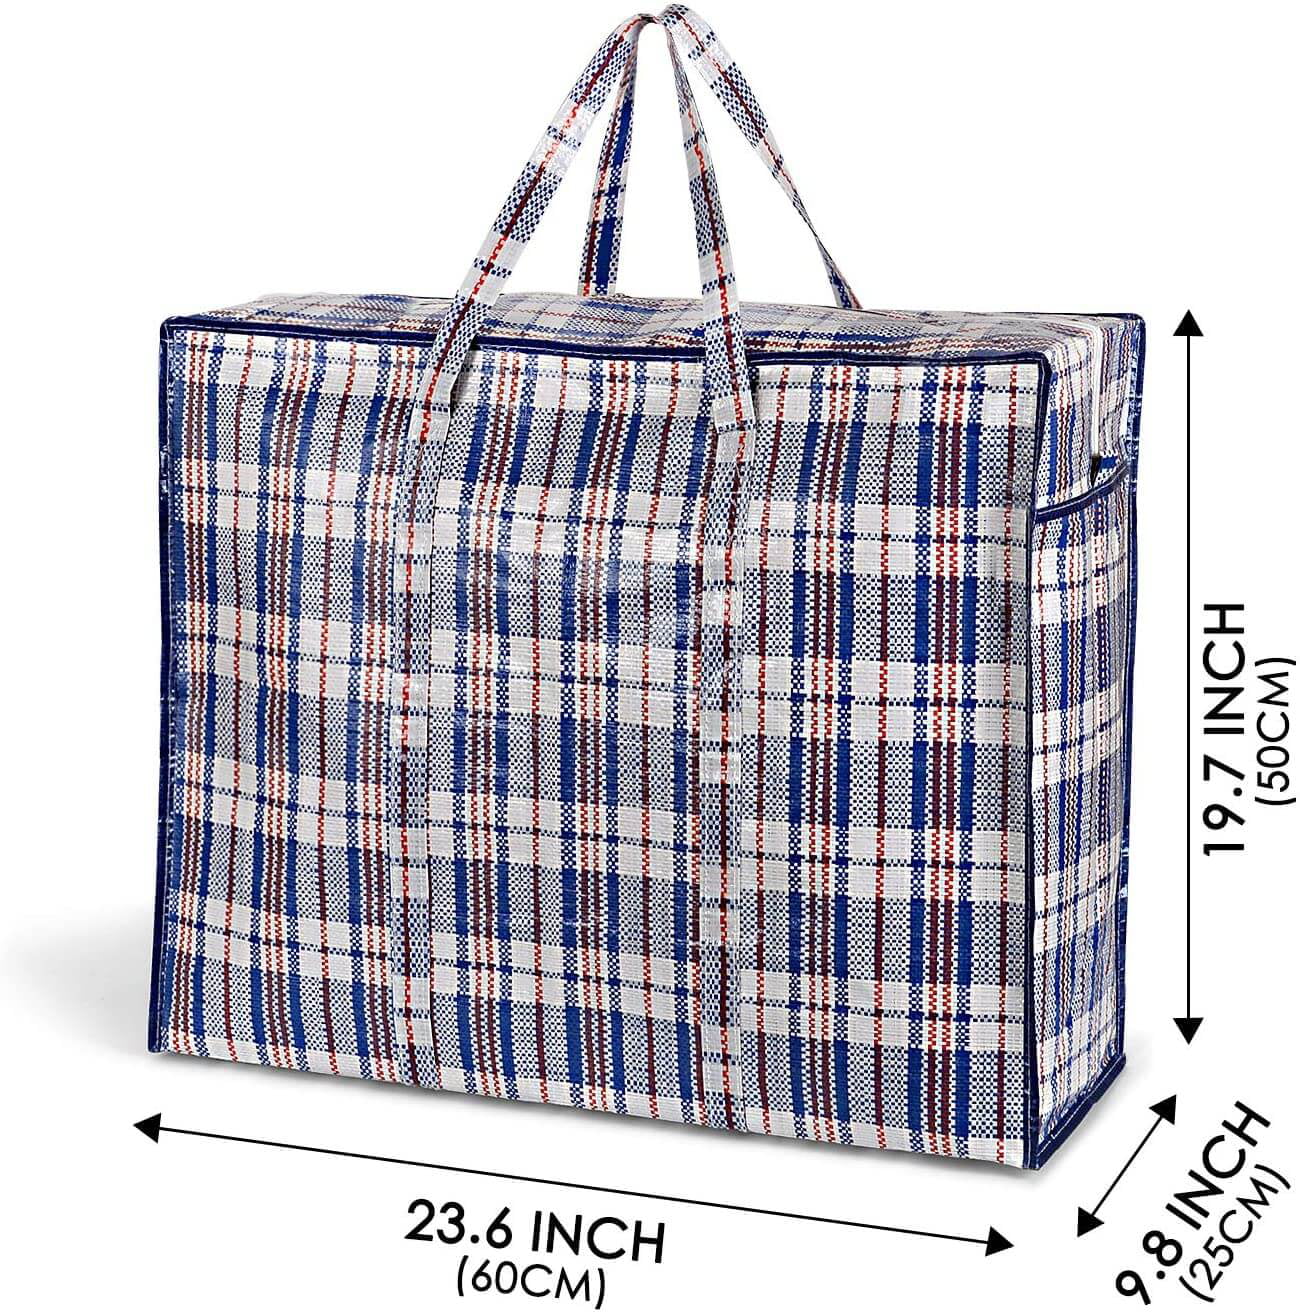 Extra-Large, 20Wx10Dx36H, Blue, Shopping Bags